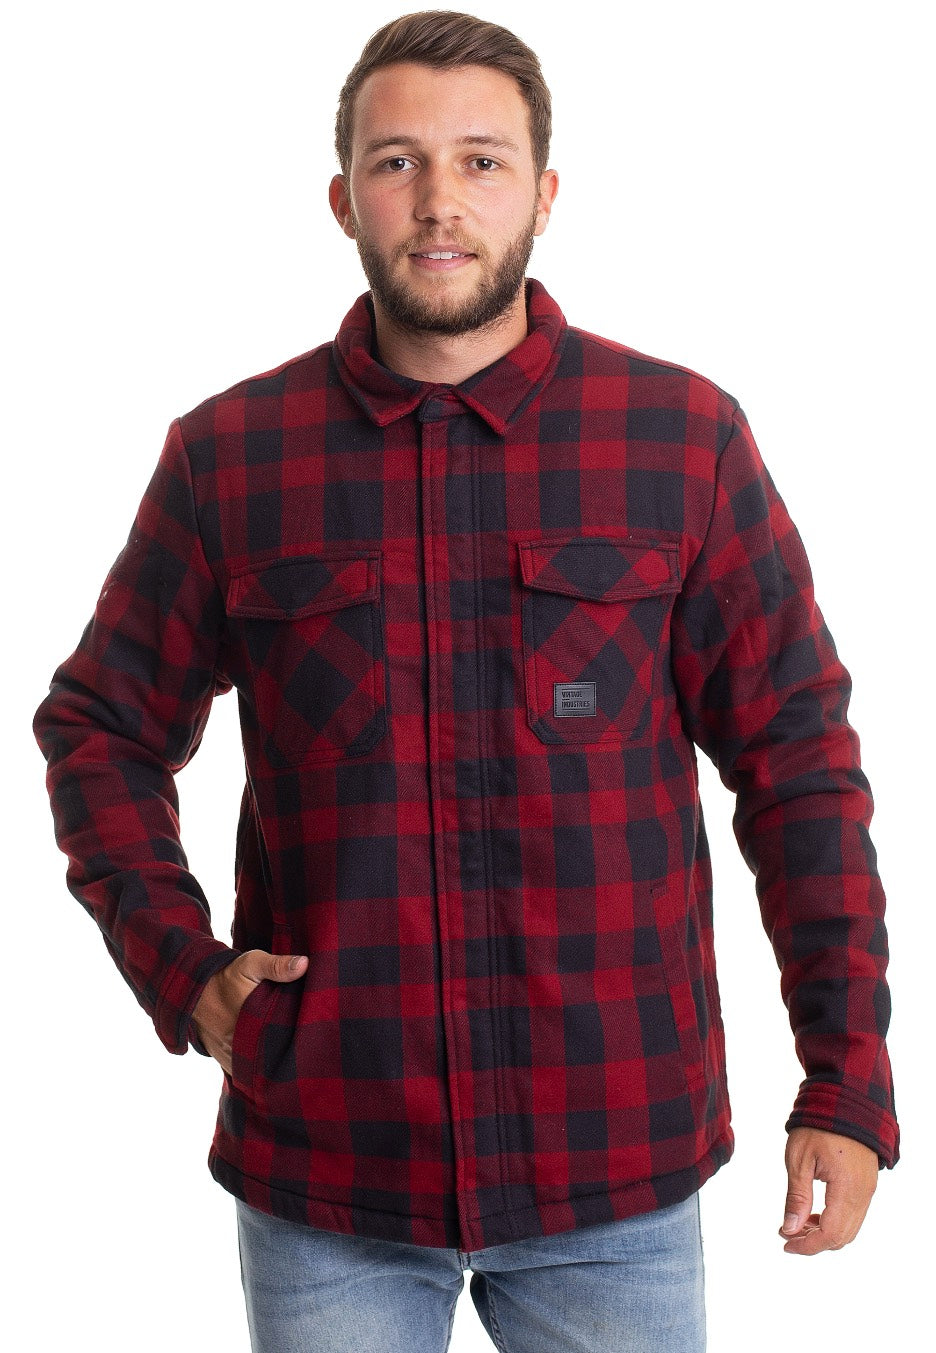 Vintage Industries - Craft Heavyweight Sherpa Red Check - Jacket